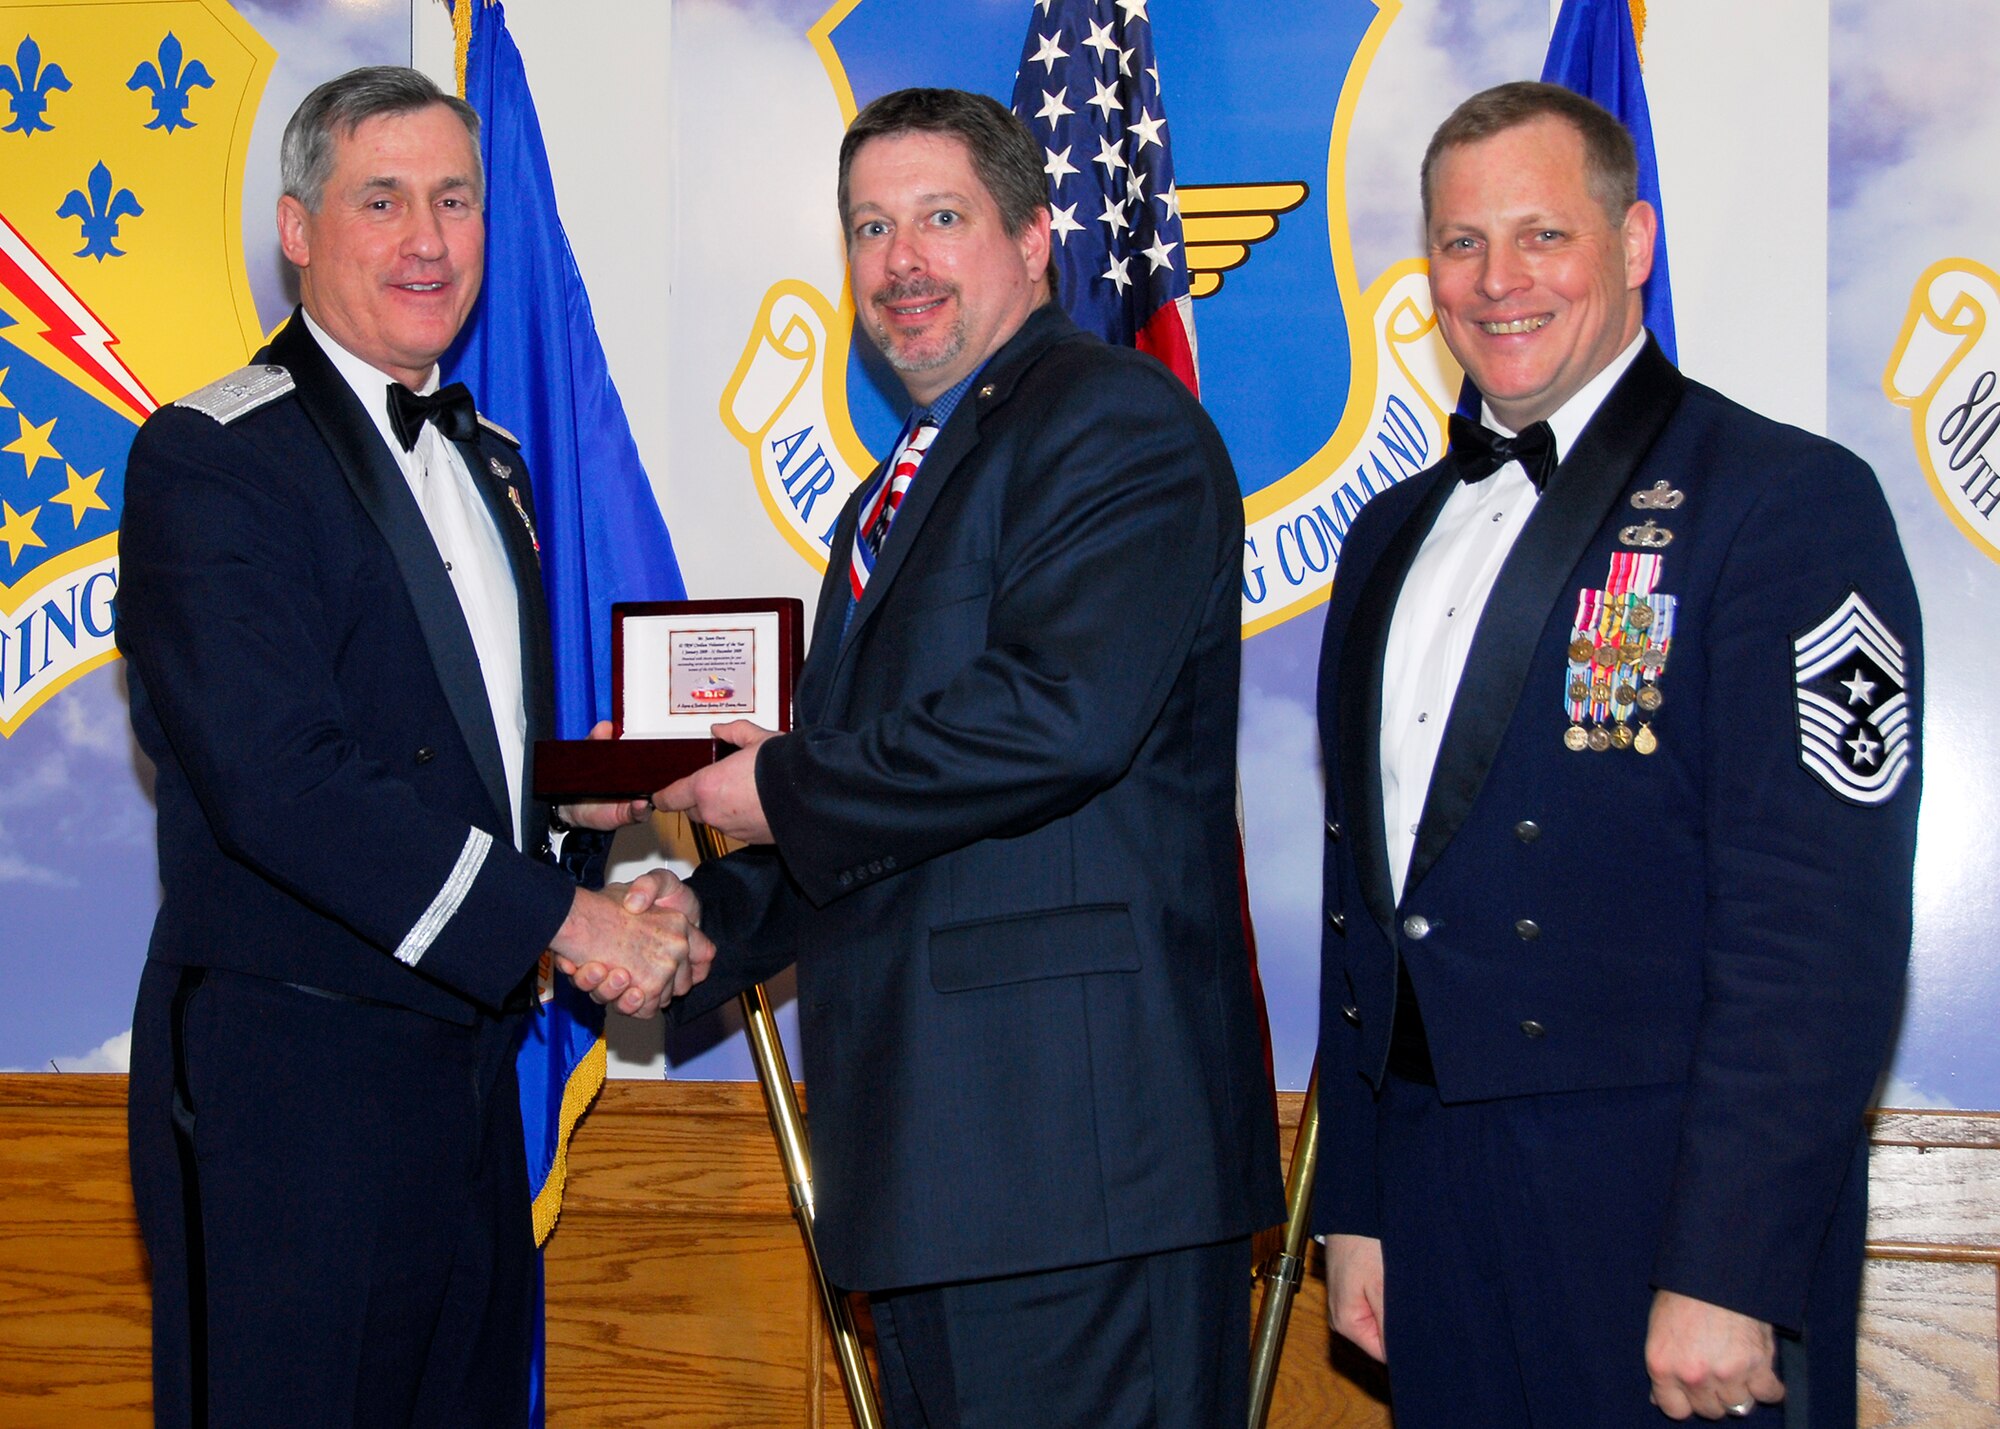 Brig. Gen. O.G. Mannon, 82nd Training Wing commander, presents Jason Durst, 82nd Training Group, with the Civilian Volunteer of the Year award March 5 during the 2009 82nd TRW Annual Awards banquet. Also pictured is wing Command Chief, Chief Master Sgt. Kenneth Sallinger. (U.S. Air Force photo/Harry Tonemah) 